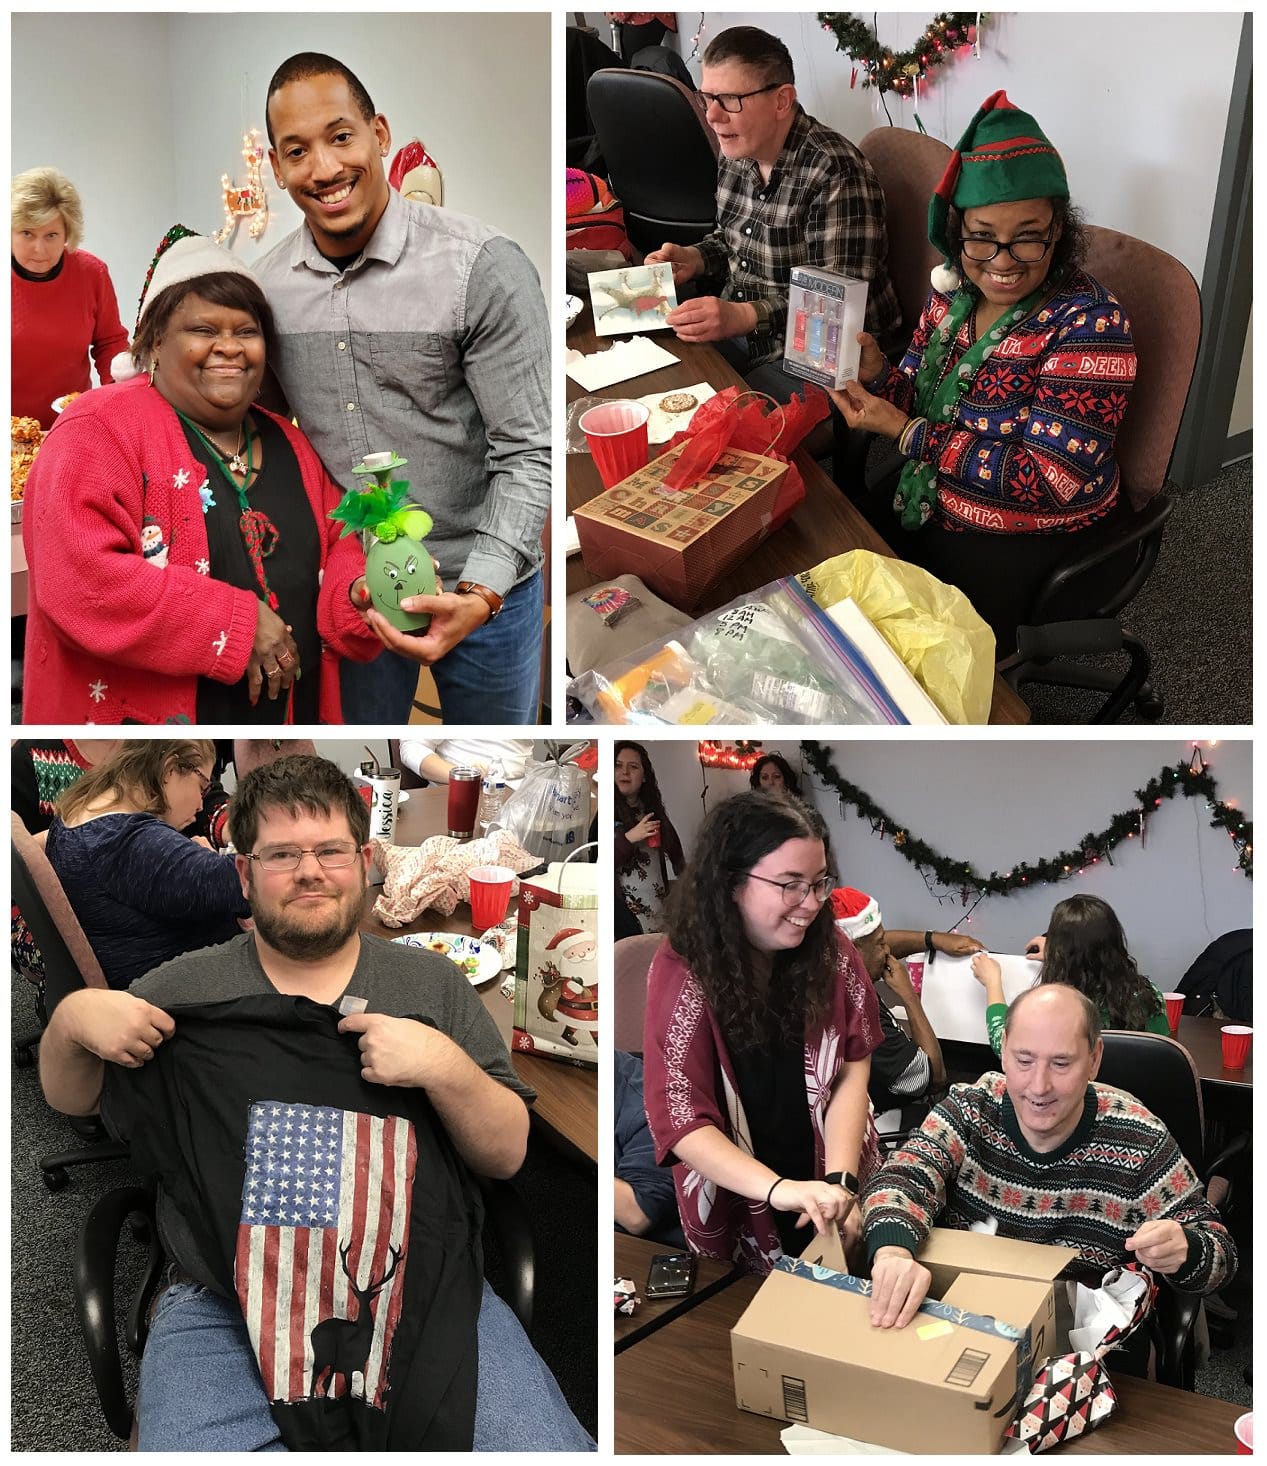 Collage of photos from HDS event, including people opening gifts.